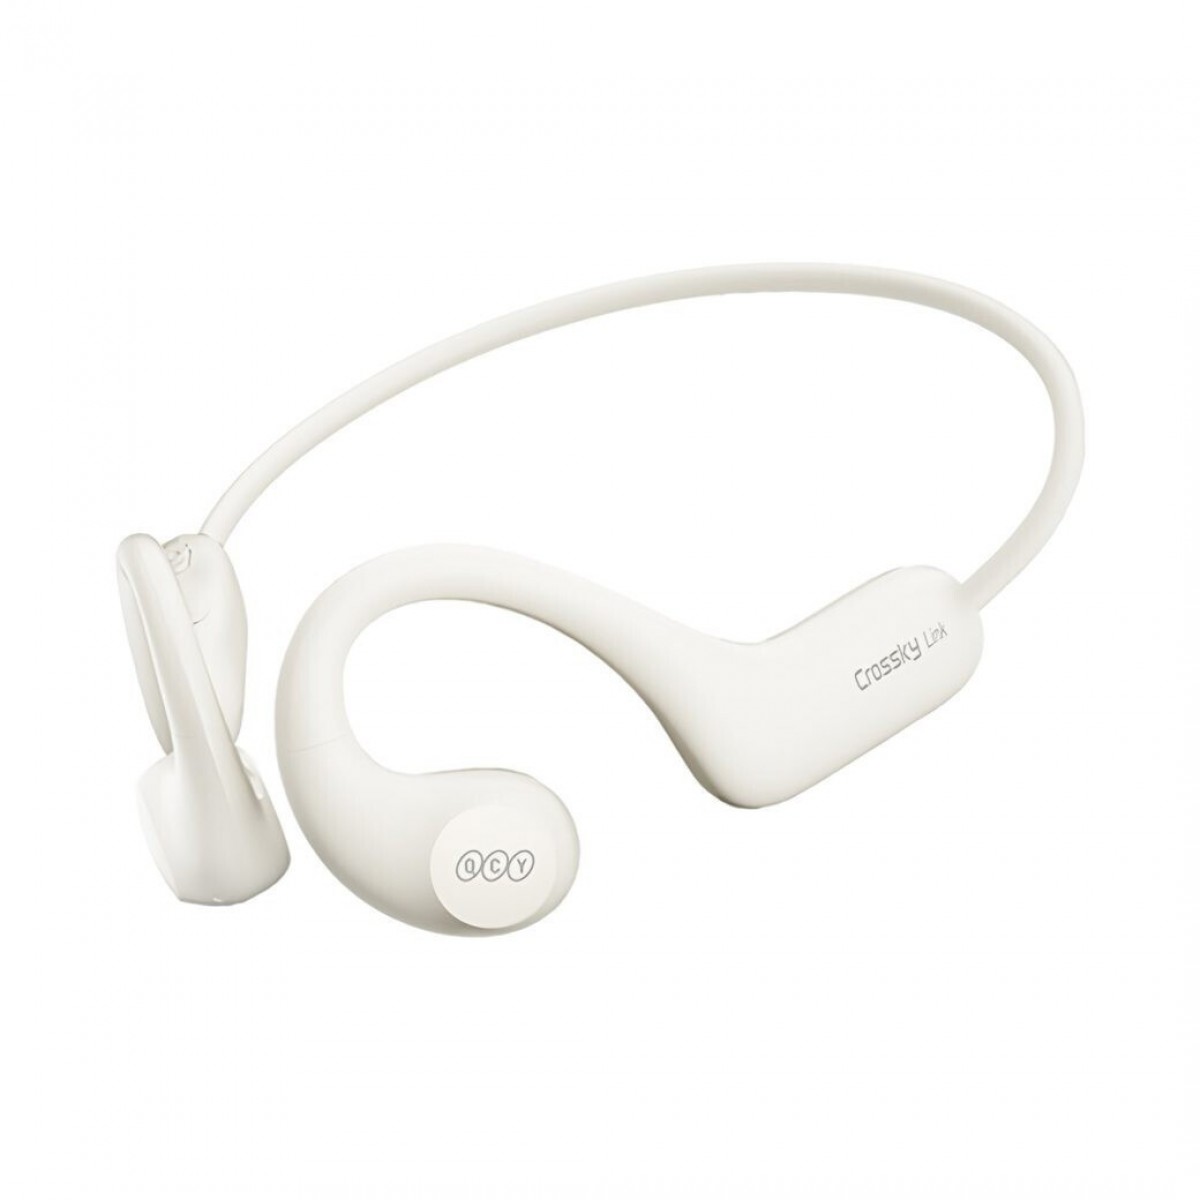 HEADPHONES QCY CROSSKY LINK – WHITE OPEN EAR AIR CONDUCTION SPORTS WATERPROOF IPX6 HEADSET BT 5.3